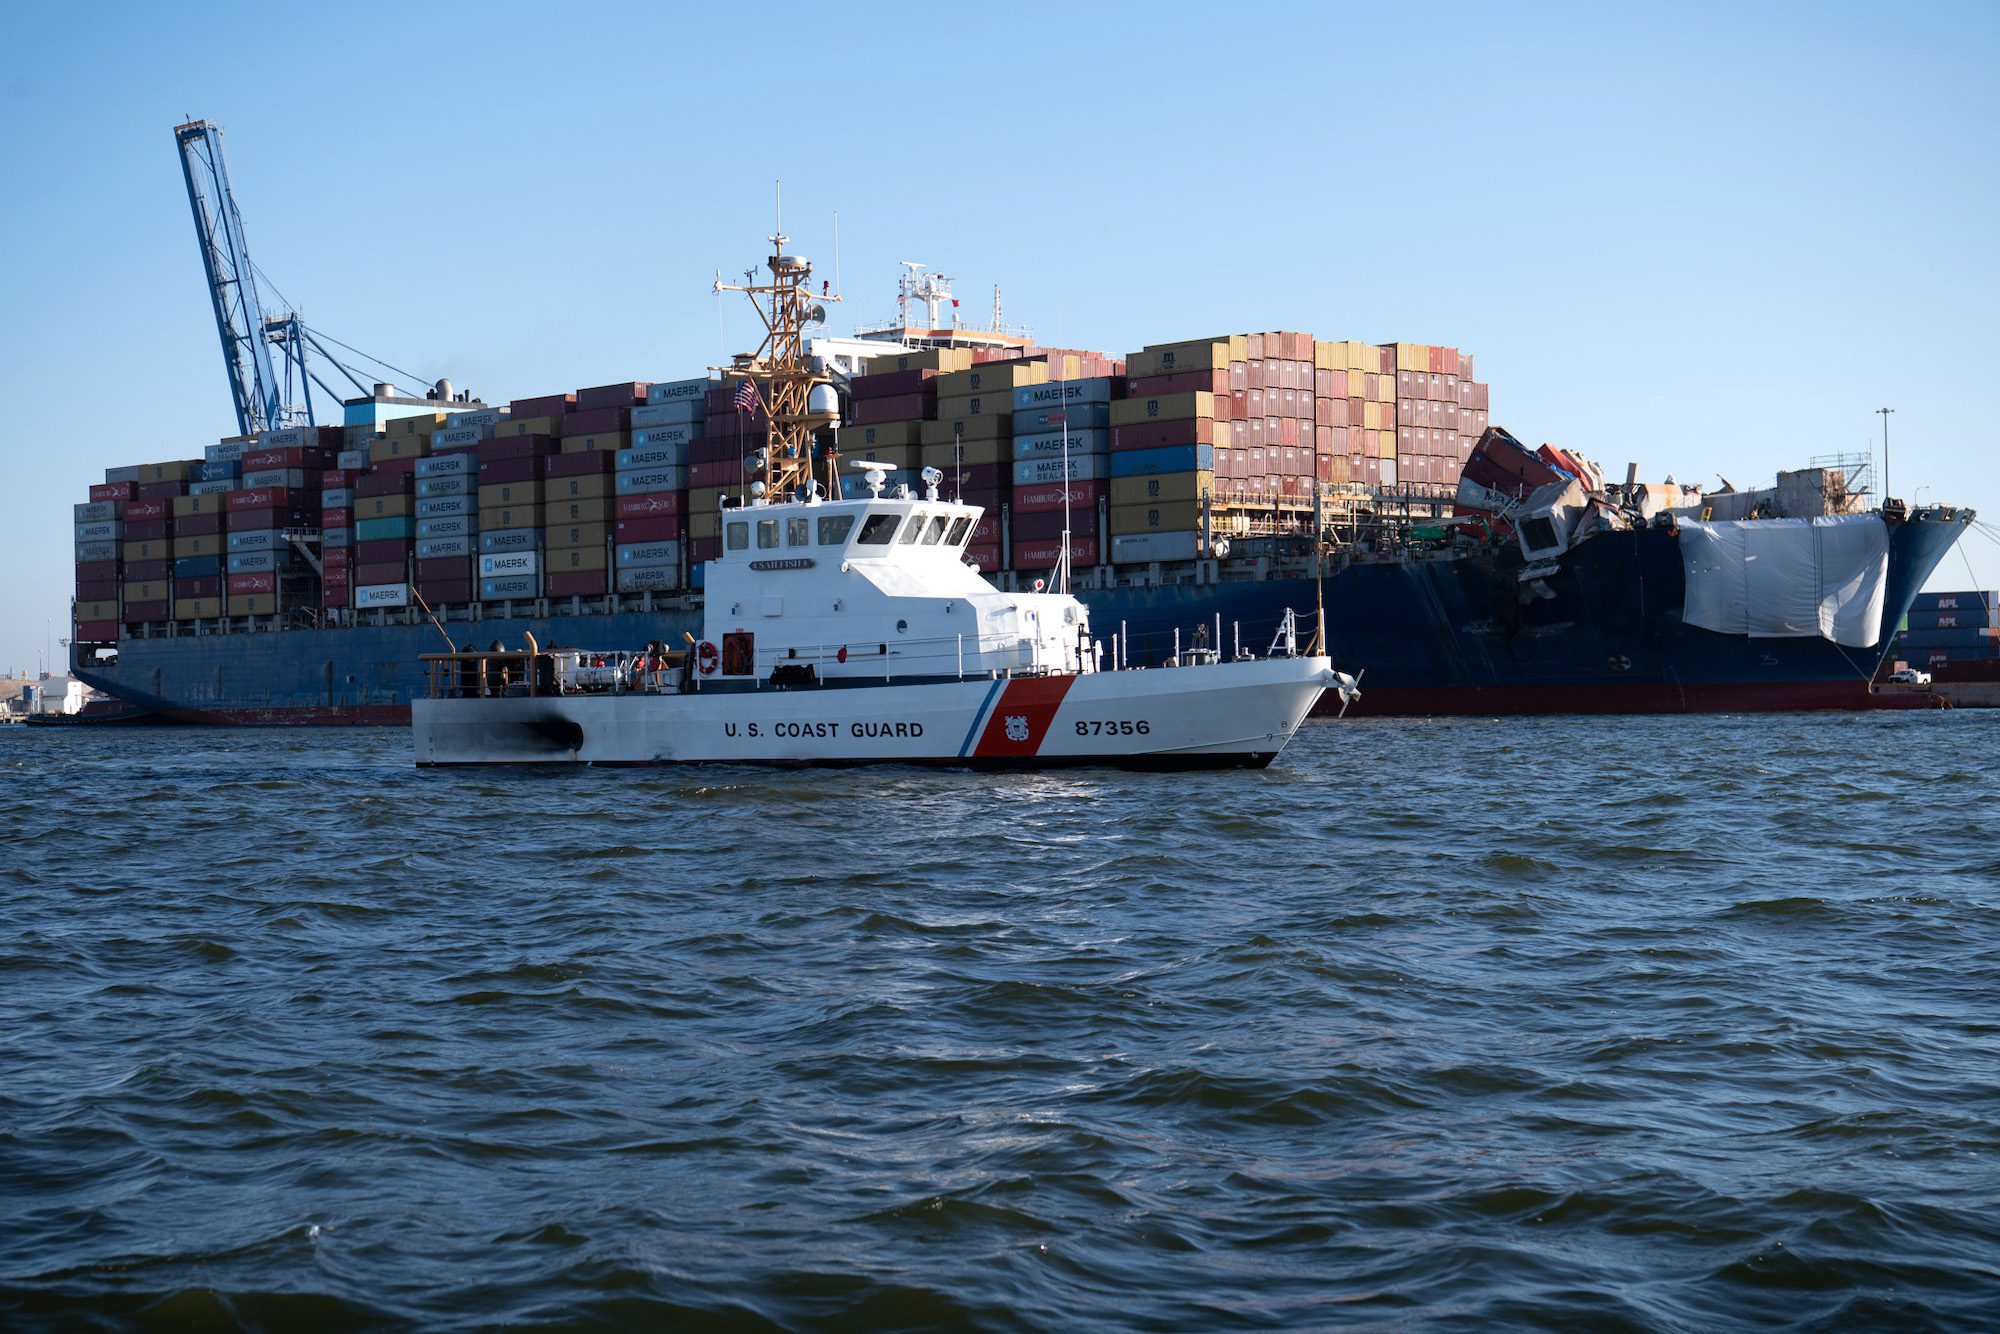 The crew of the U.S. Coast Guard Cutter Sailfish, an 87-foot Marine Protector class vessel, prepares to escort the Motor Vessel Dali during its transit from the Port of Baltimore to the Port of Virginia, June 24, 2024. U.S. Coast Guard Photo